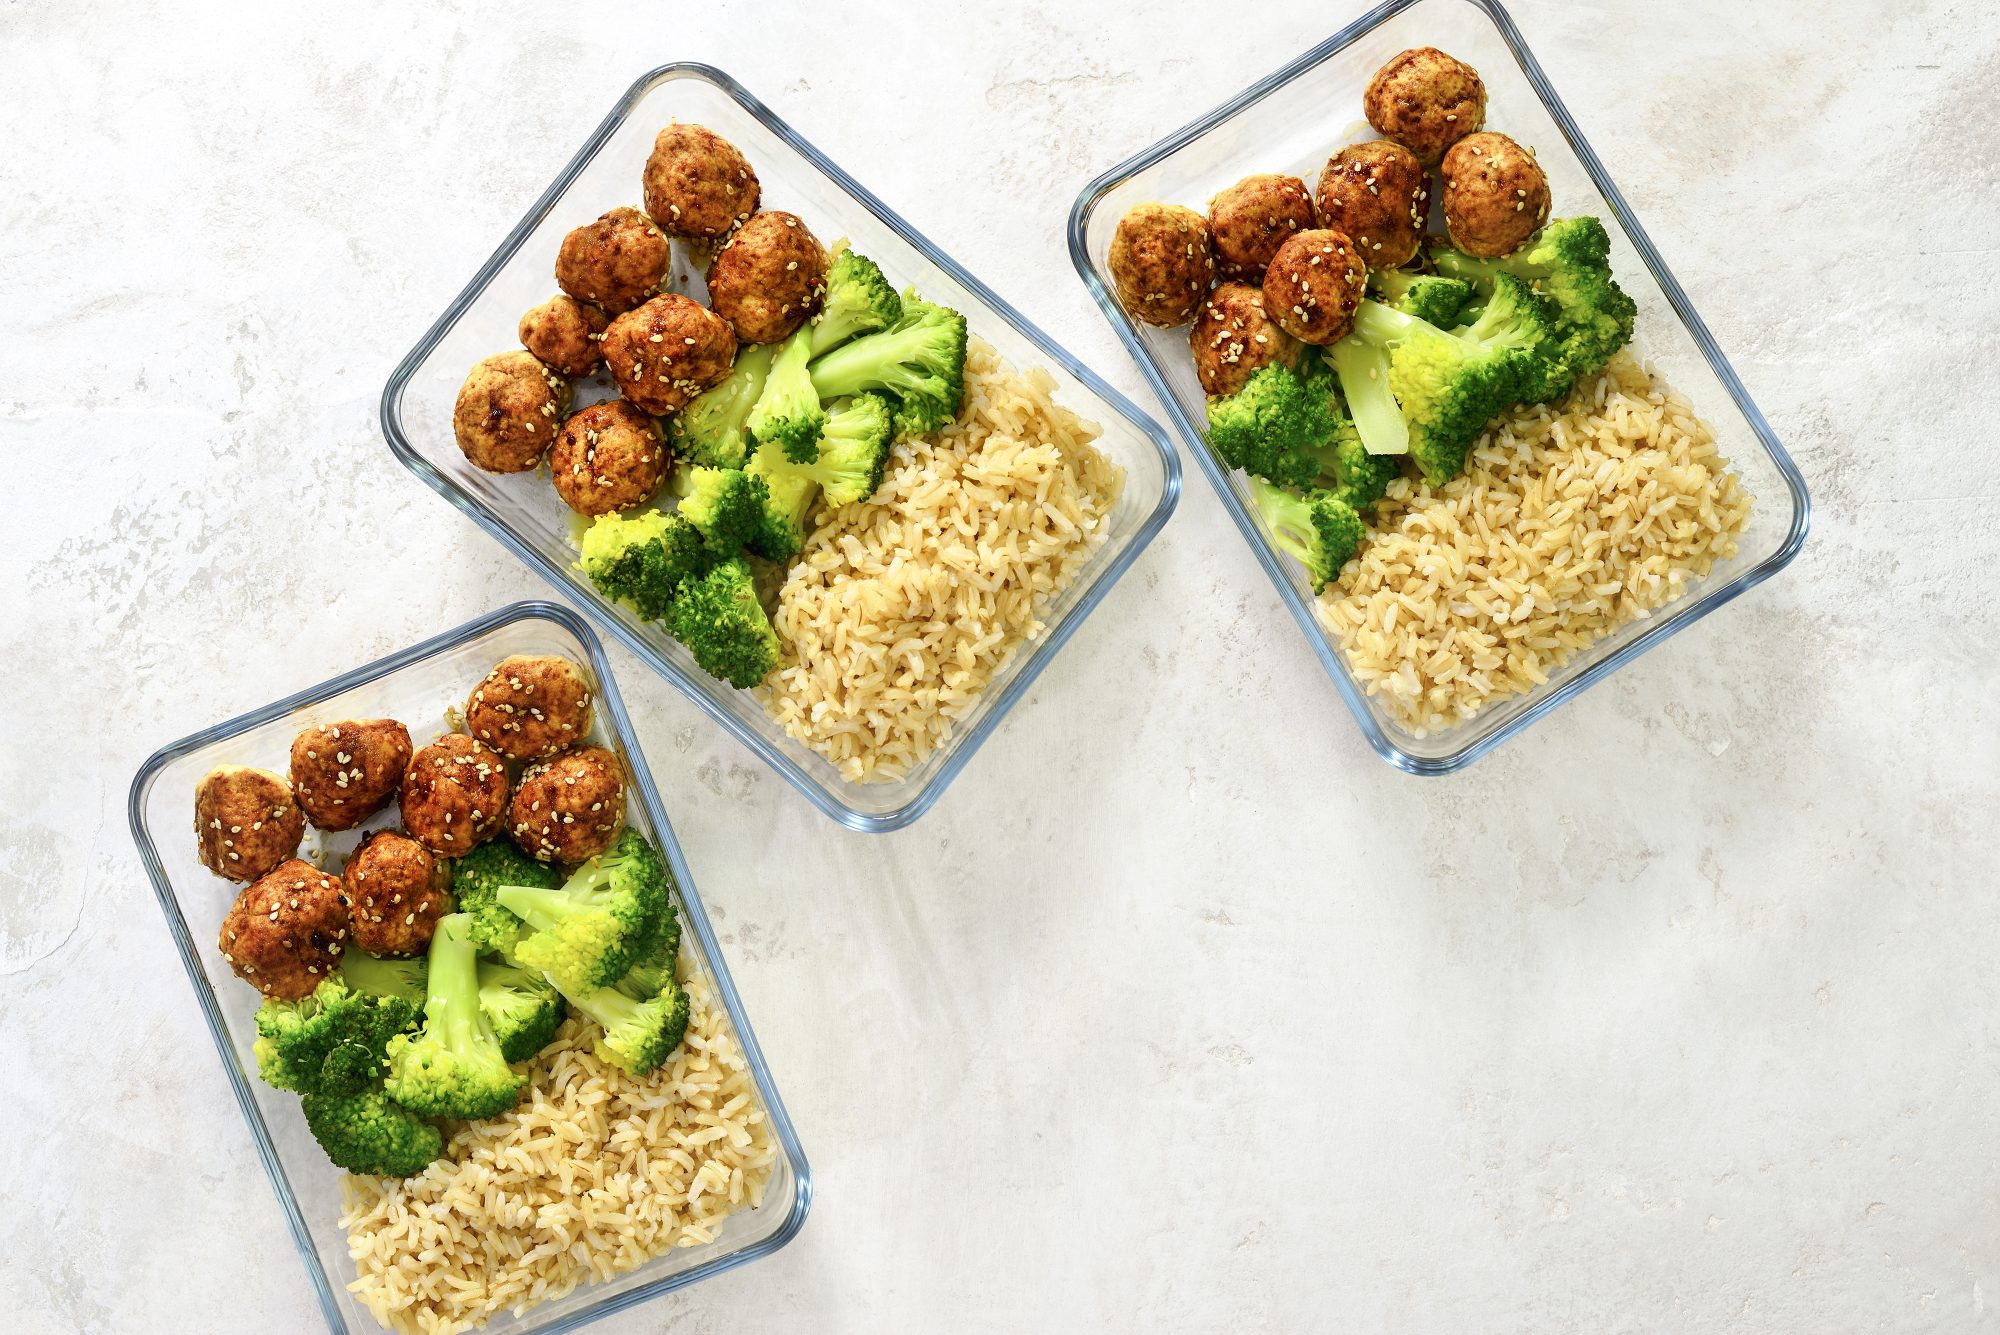 Meatballs and broccoli lunch boxes